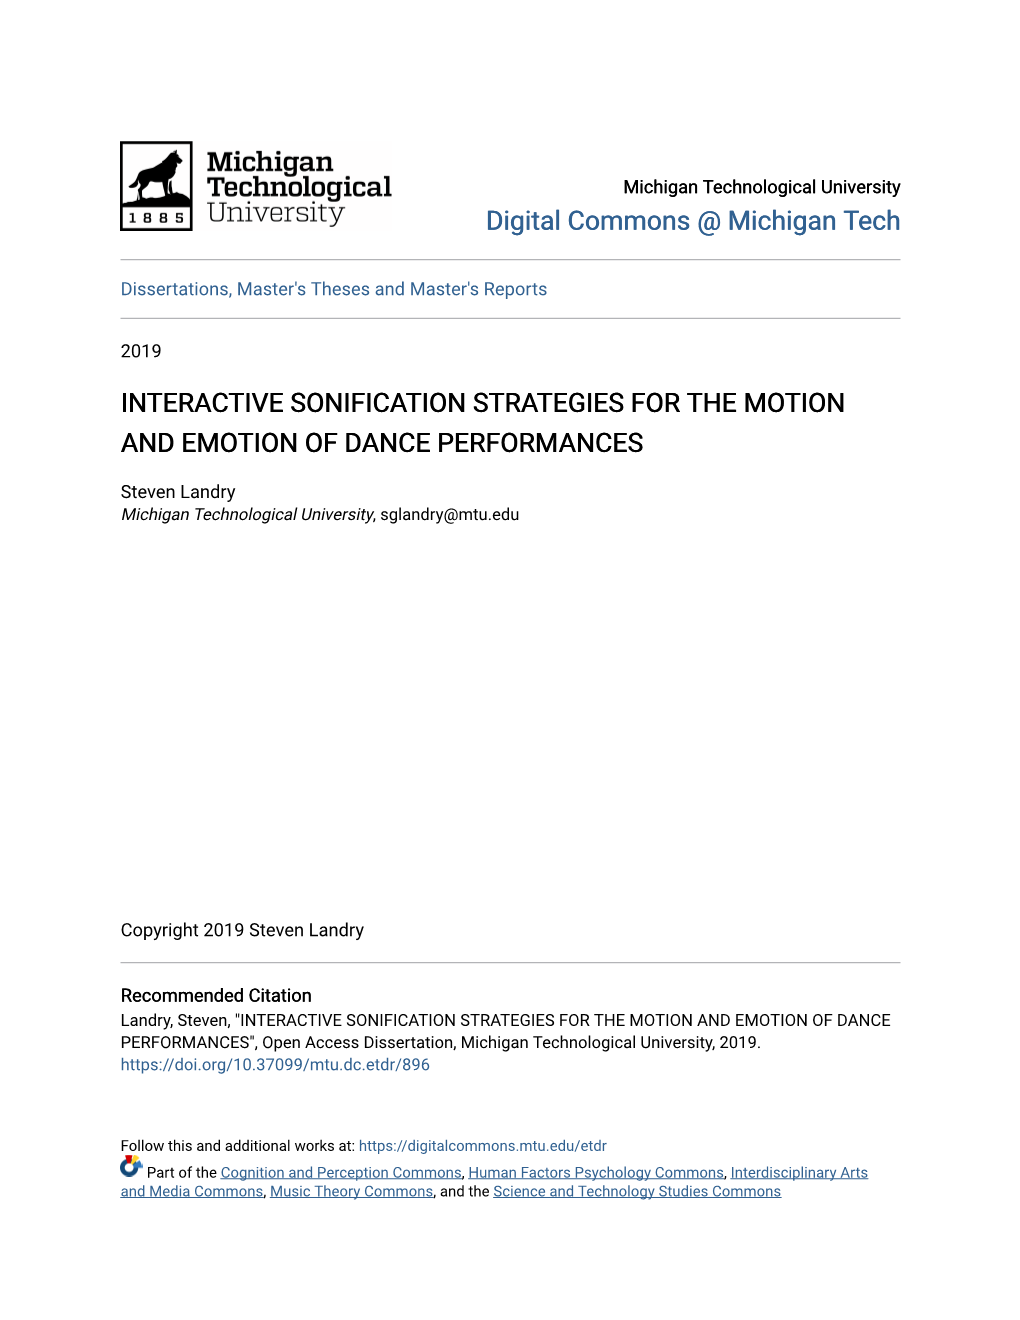 Interactive Sonification Strategies for the Motion and Emotion of Dance Performances